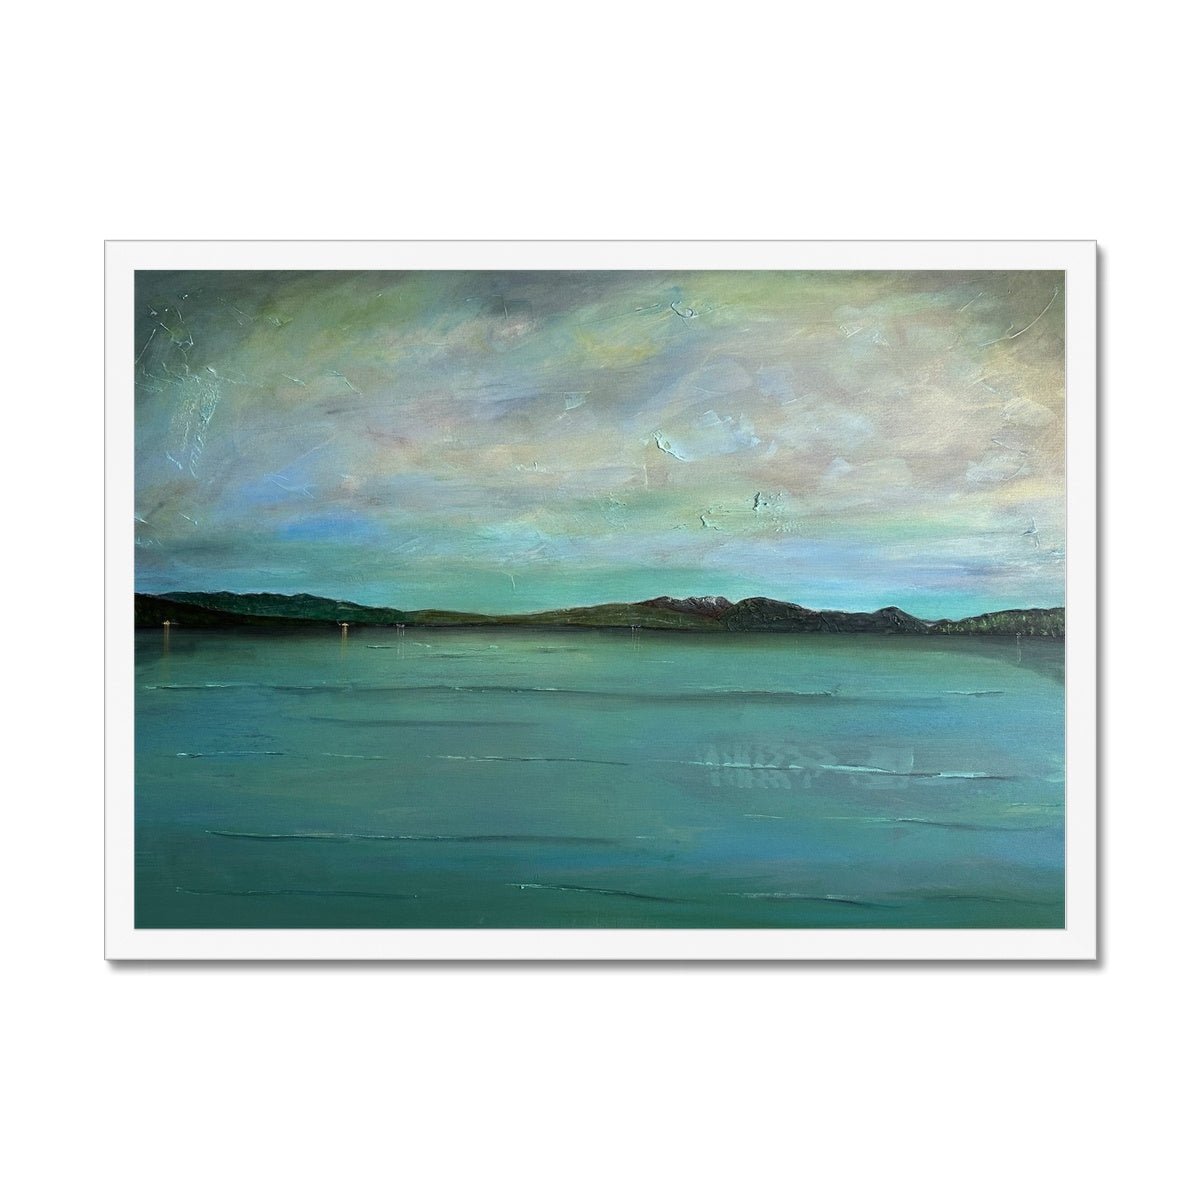 An Emerald Loch Lomond Painting | Framed Prints From Scotland-Framed Prints-Scottish Lochs & Mountains Art Gallery-A2 Landscape-White Frame-Paintings, Prints, Homeware, Art Gifts From Scotland By Scottish Artist Kevin Hunter